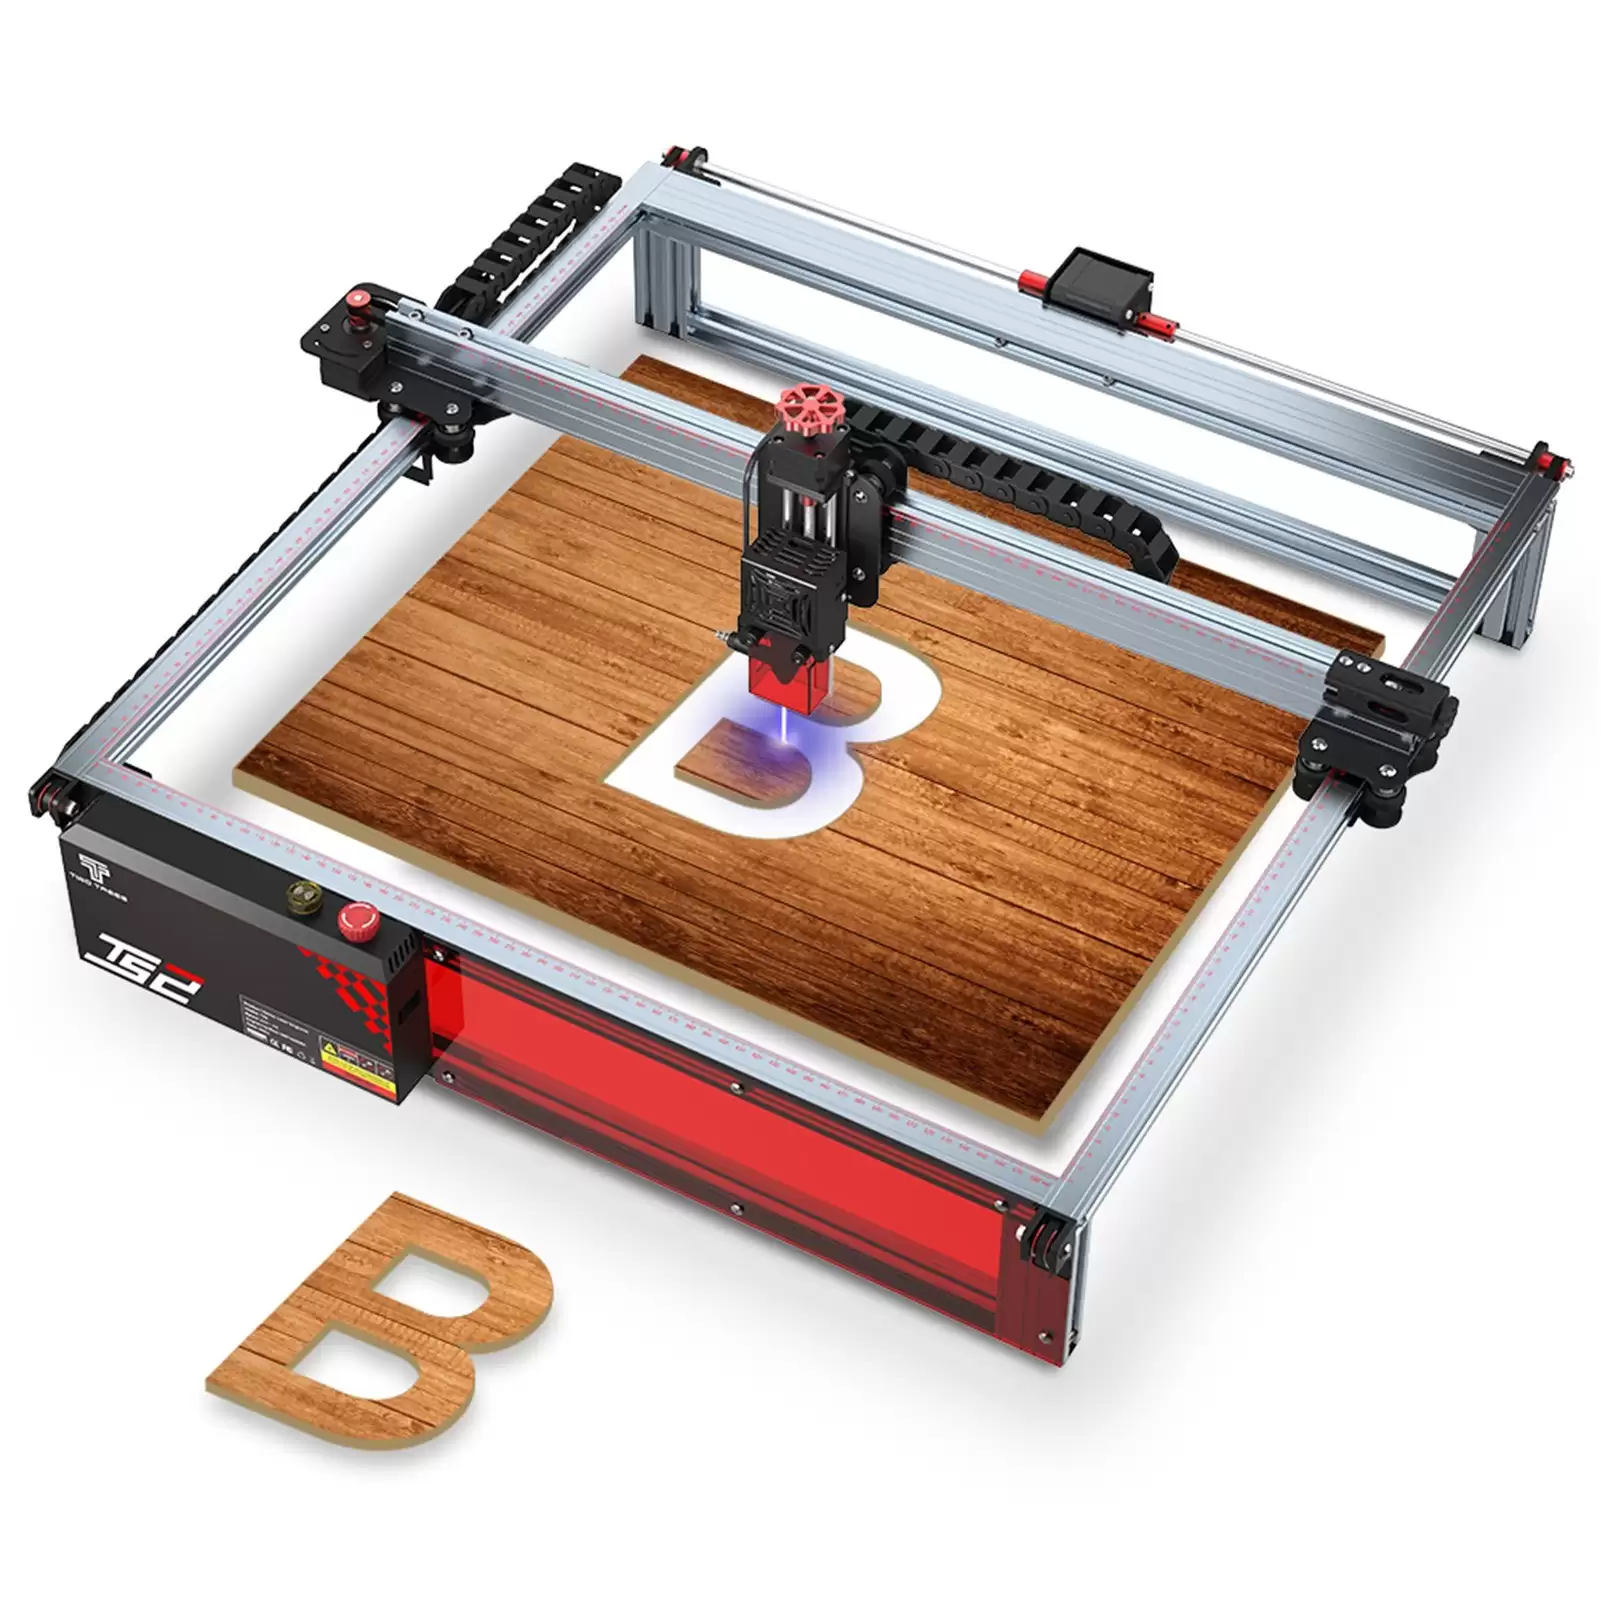 Order In Just $520.99 Original Two Trees Ts2 Laser Engraver 10w Laser Cutter Using This Tomtop Discount Code